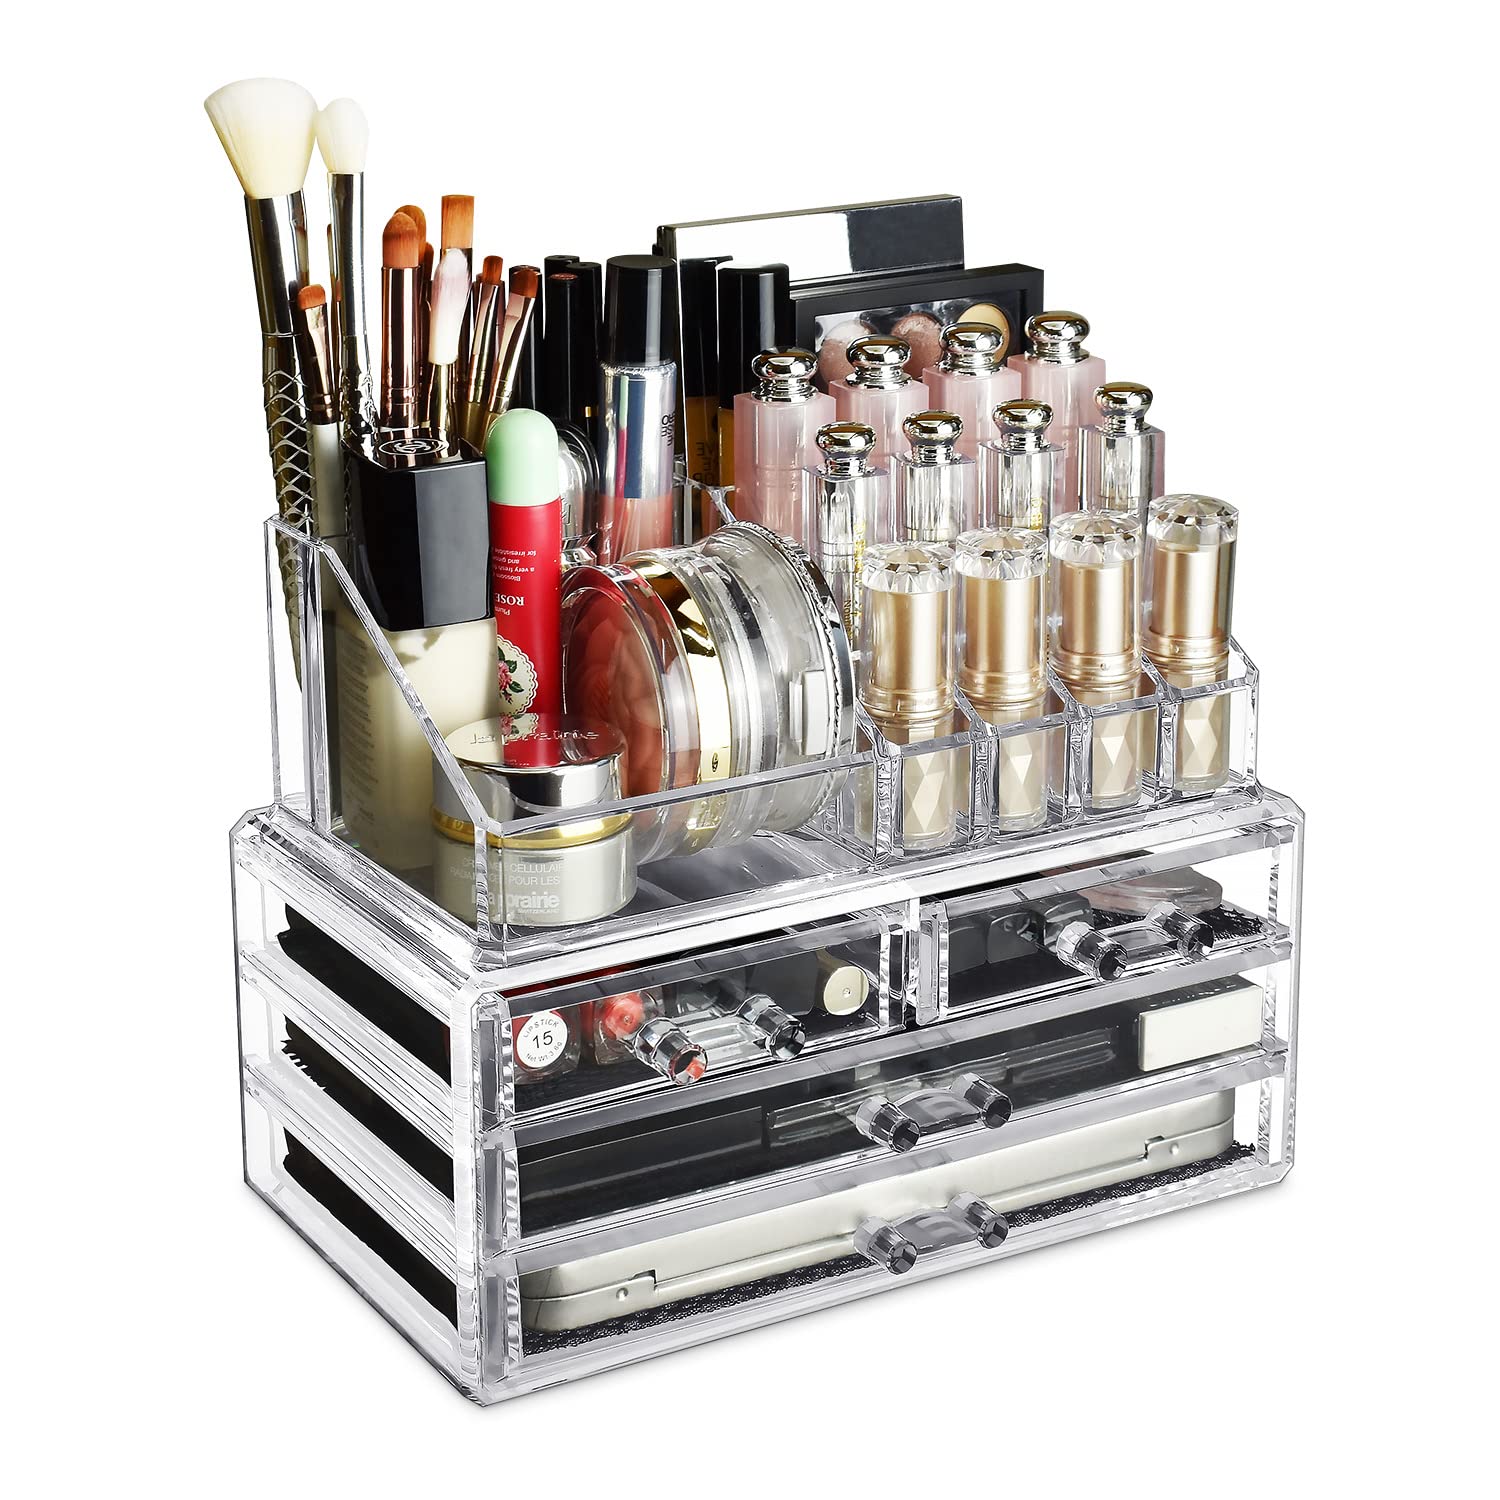 Ikee Design Clear Cosmetic Storage Clear Makeup Organizer Cosmetic Case Vanity, Bathroom Counter